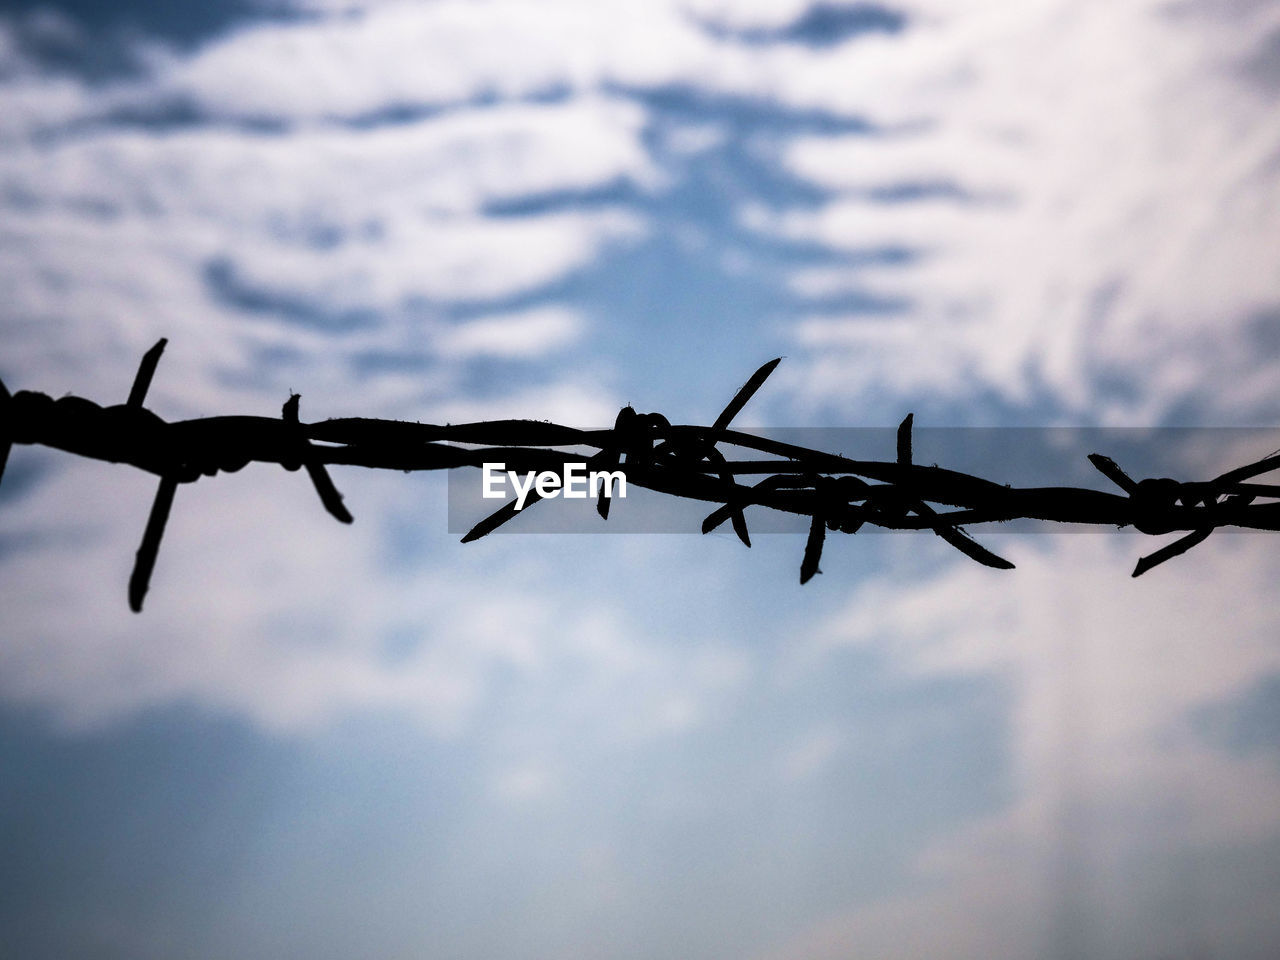 CLOSE-UP OF BARBED WIRE AGAINST FENCE